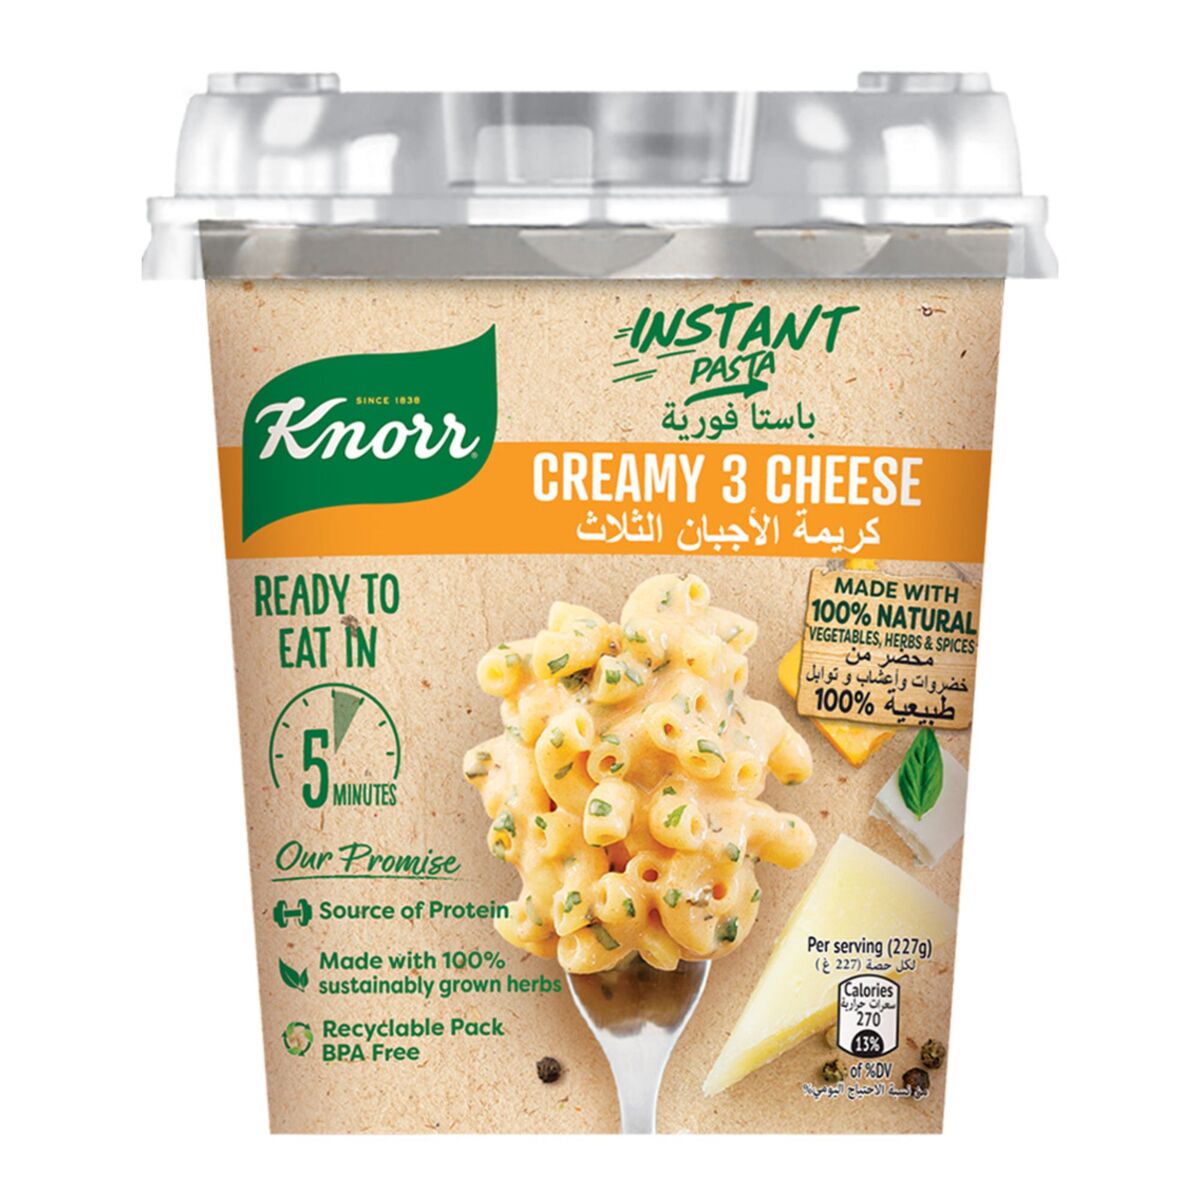 Knorr Creamy 3 Cheese Instant Pasta 67 g